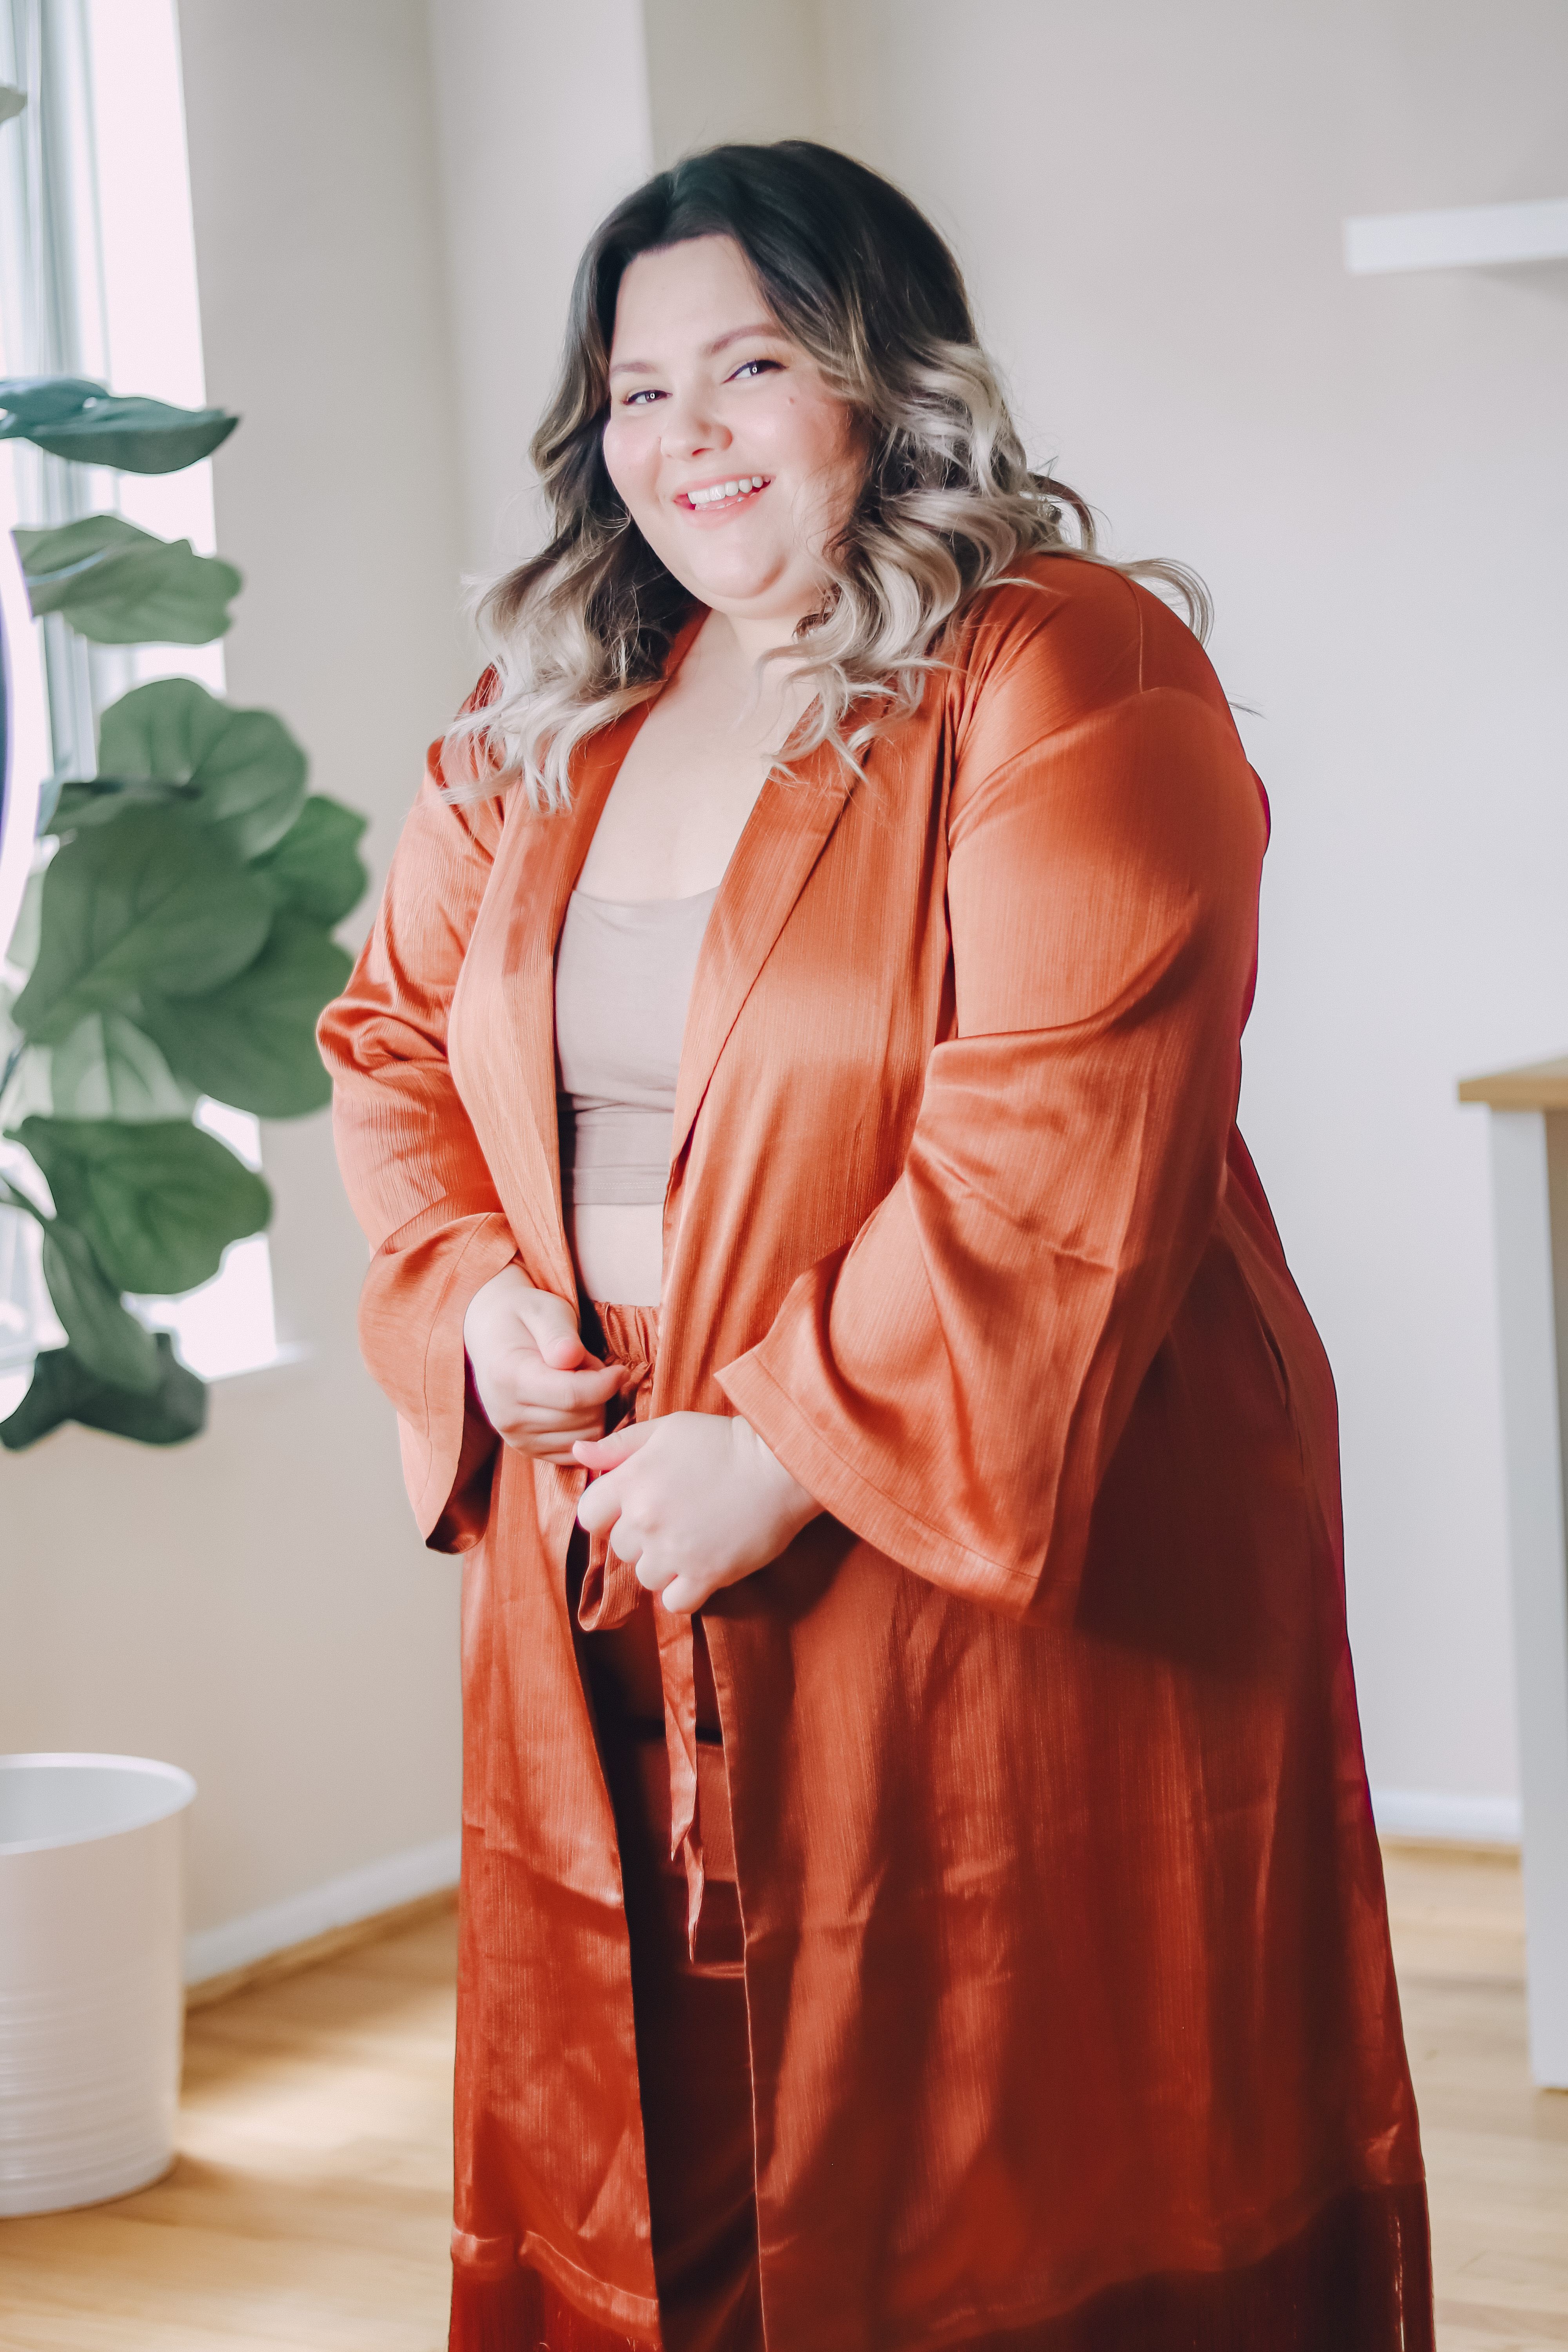 Chicago Plus Size Petite Fashion Blogger, influencer, YouTuber, and model Natalie Craig, of Natalie in the City, in Eloquii